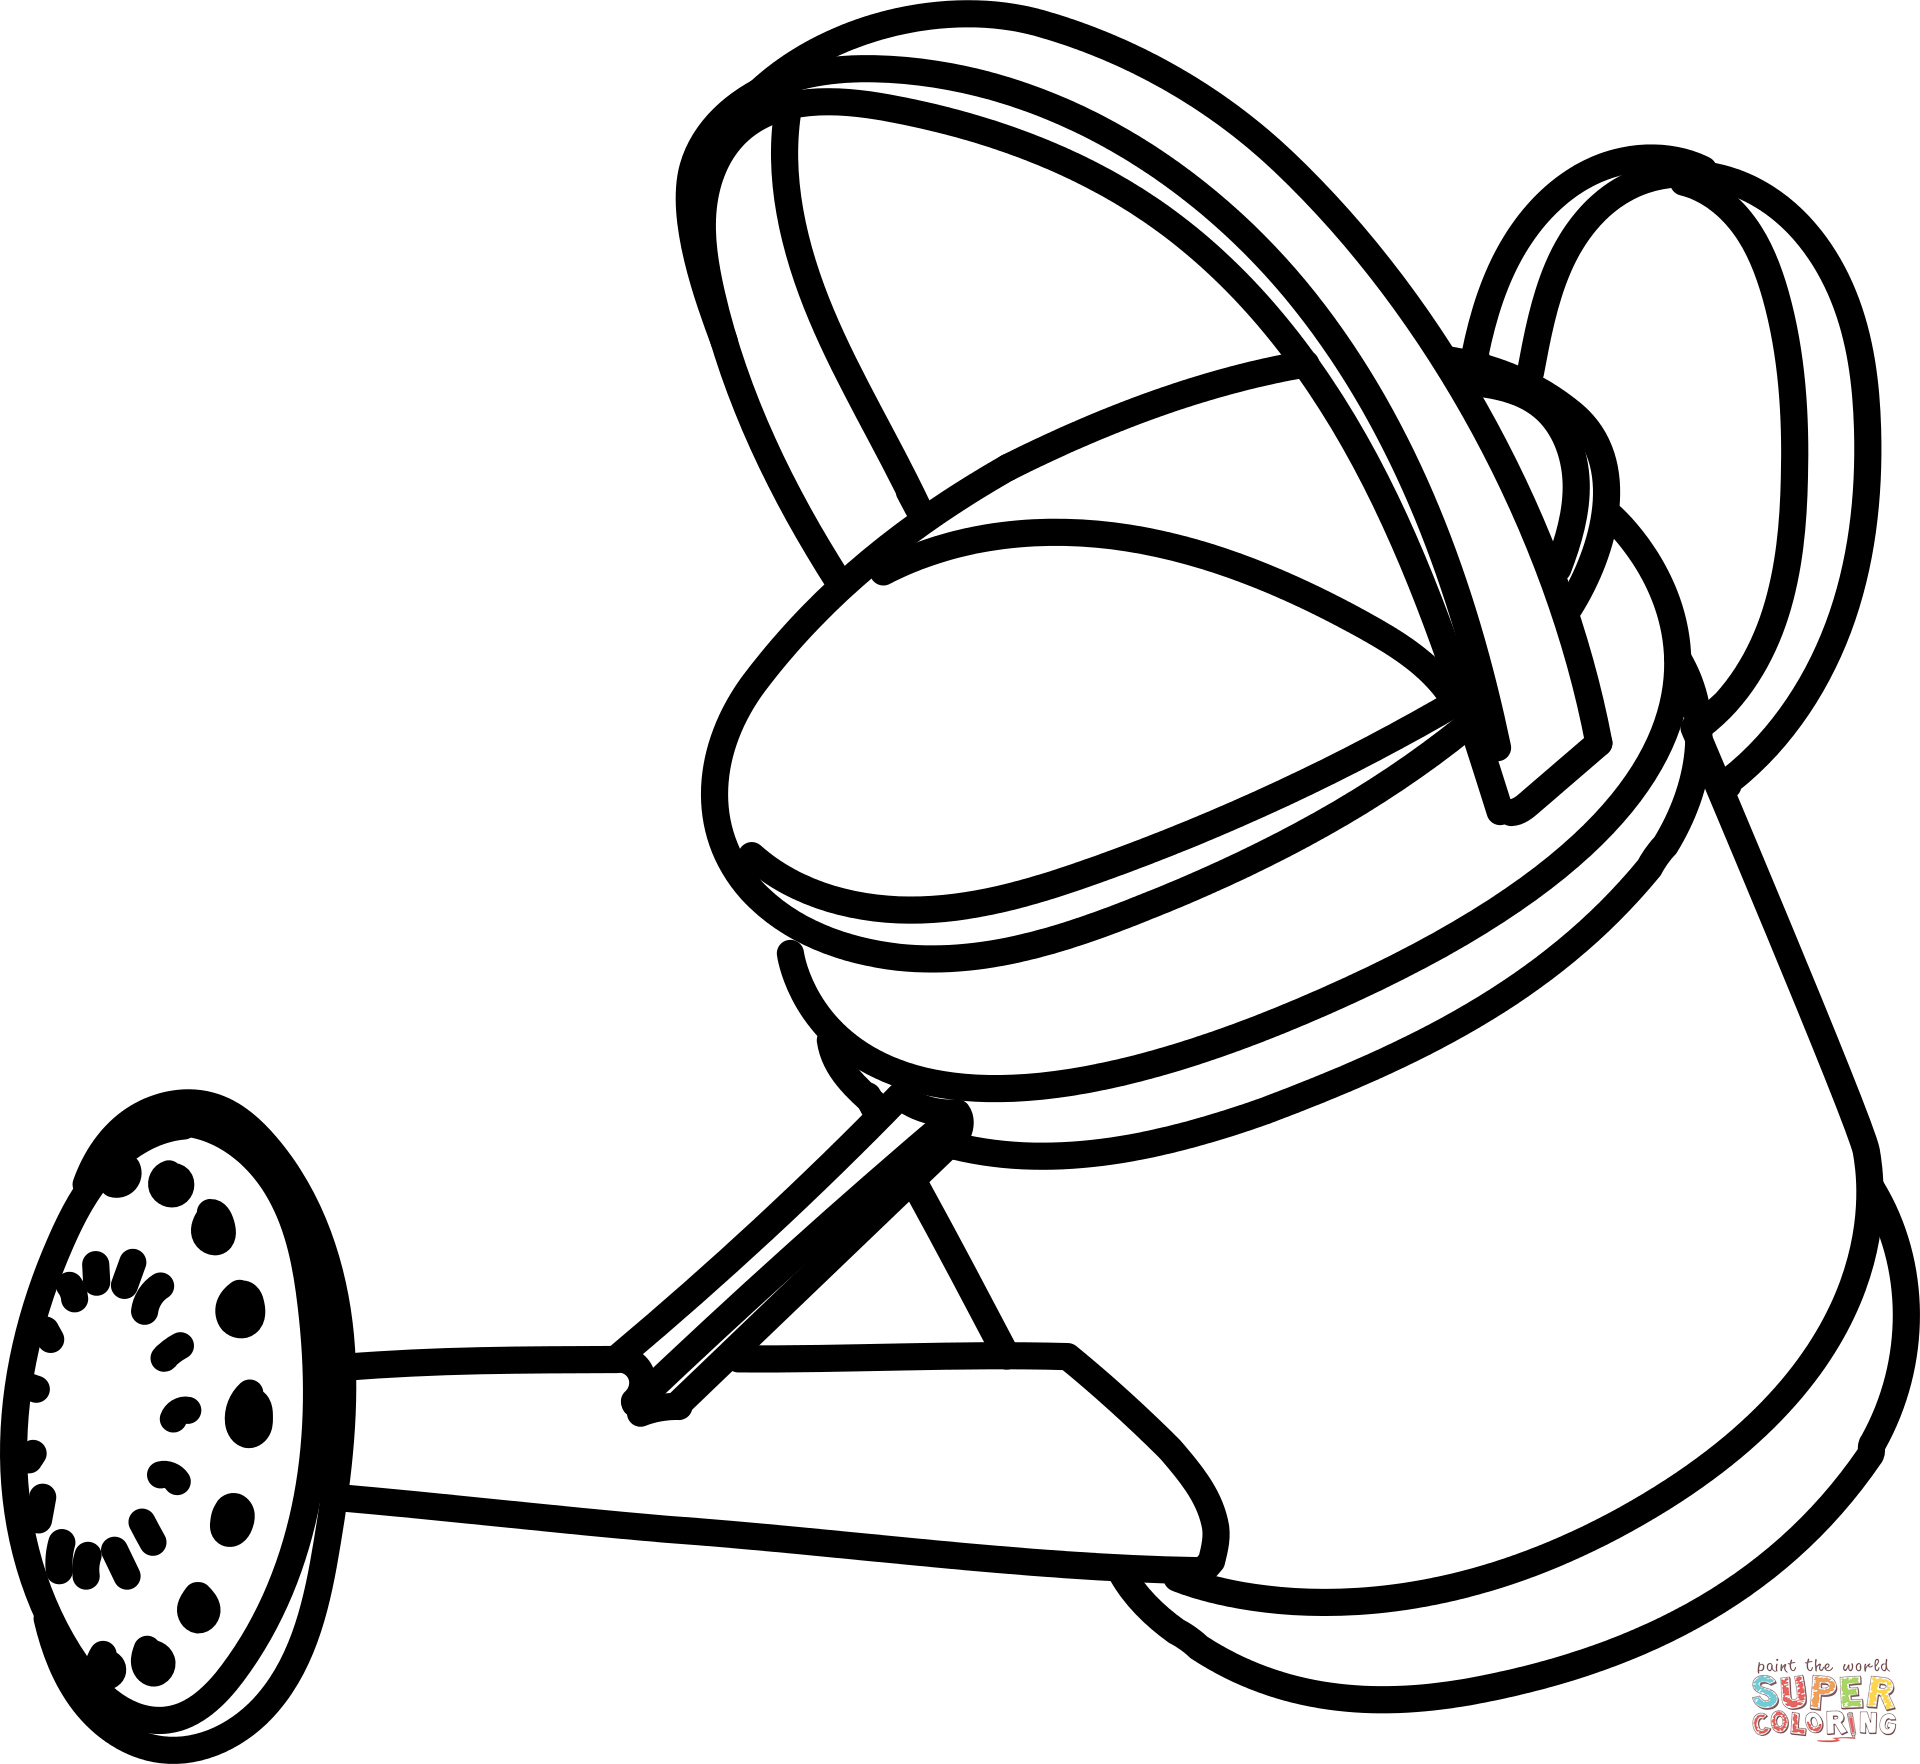 Plant watering can coloring page free printable coloring pages